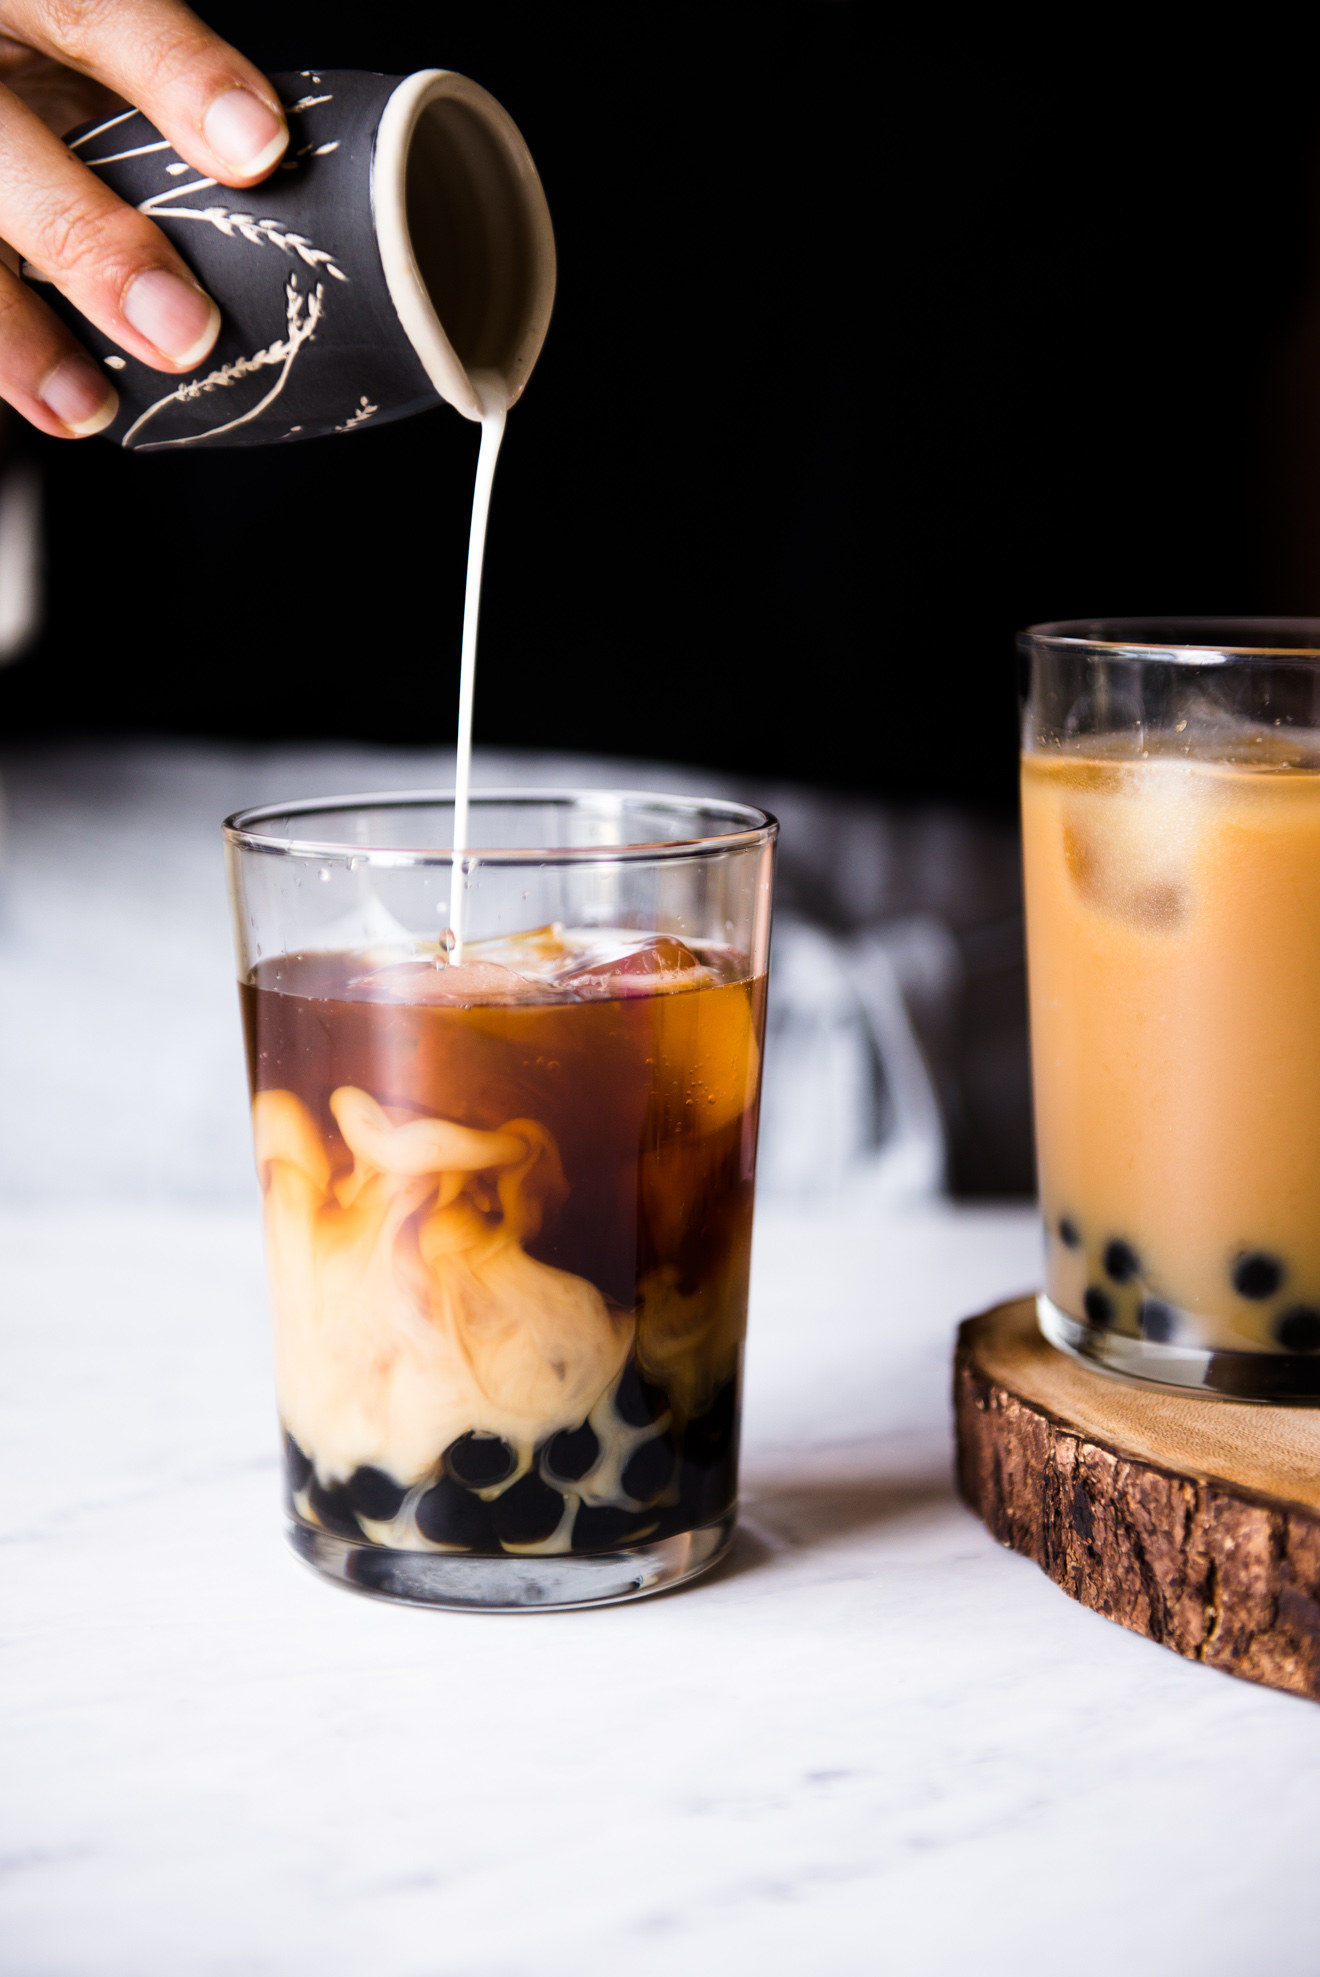 A hand pours a thin stream of milk into a clear glass in which it mixes with black tea and boba pearls for a swirling effect